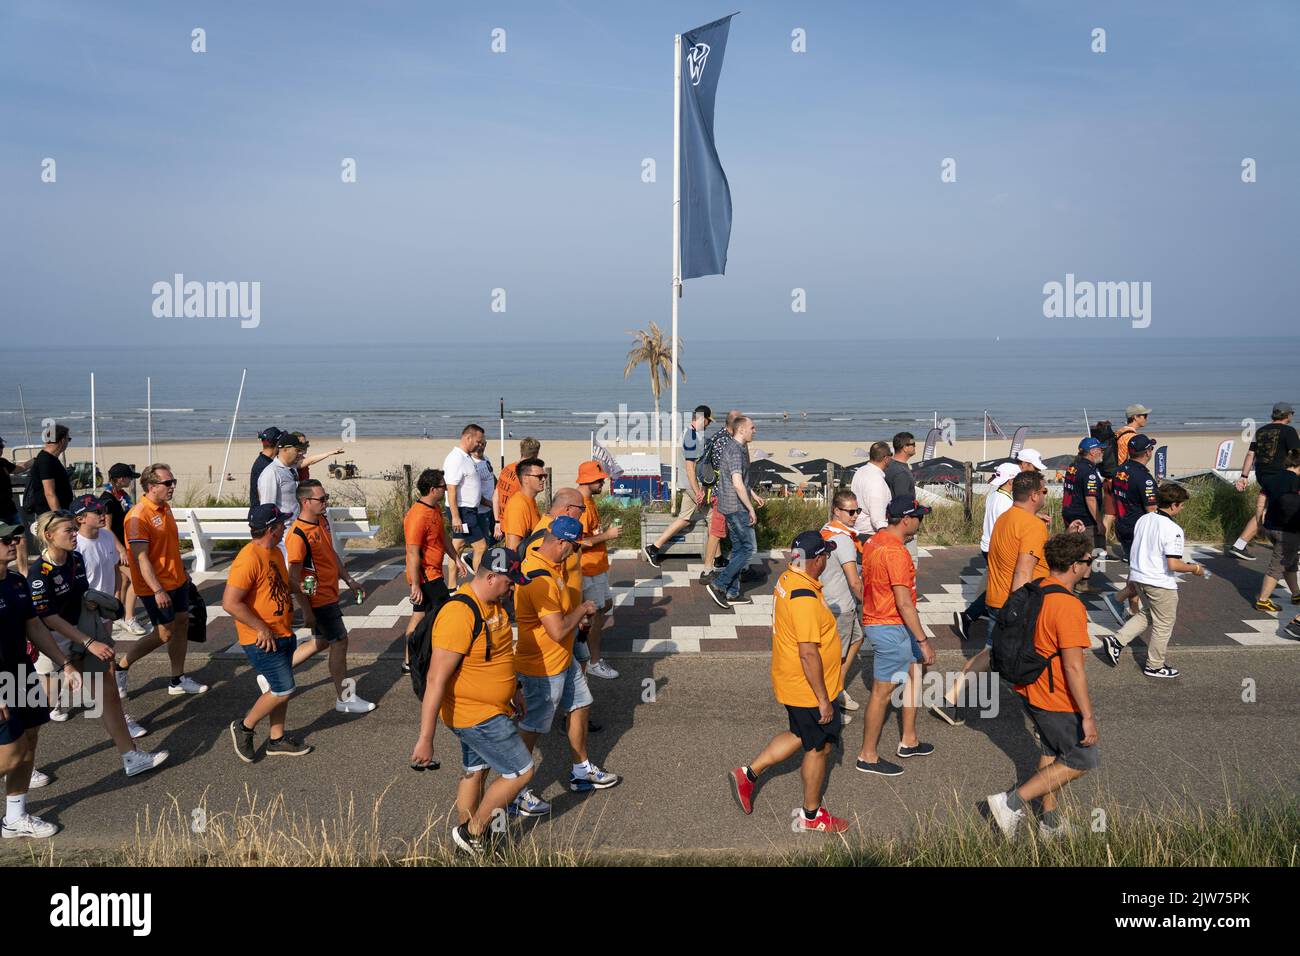 2022-09-04 10:40:53 ZANDVOORT - Visitors on their way to the Zandvoort circuit where the F1 Grand Prix of the Netherlands will be held. ANP JEROEN JUMELET netherlands out - belgium out Stock Photo